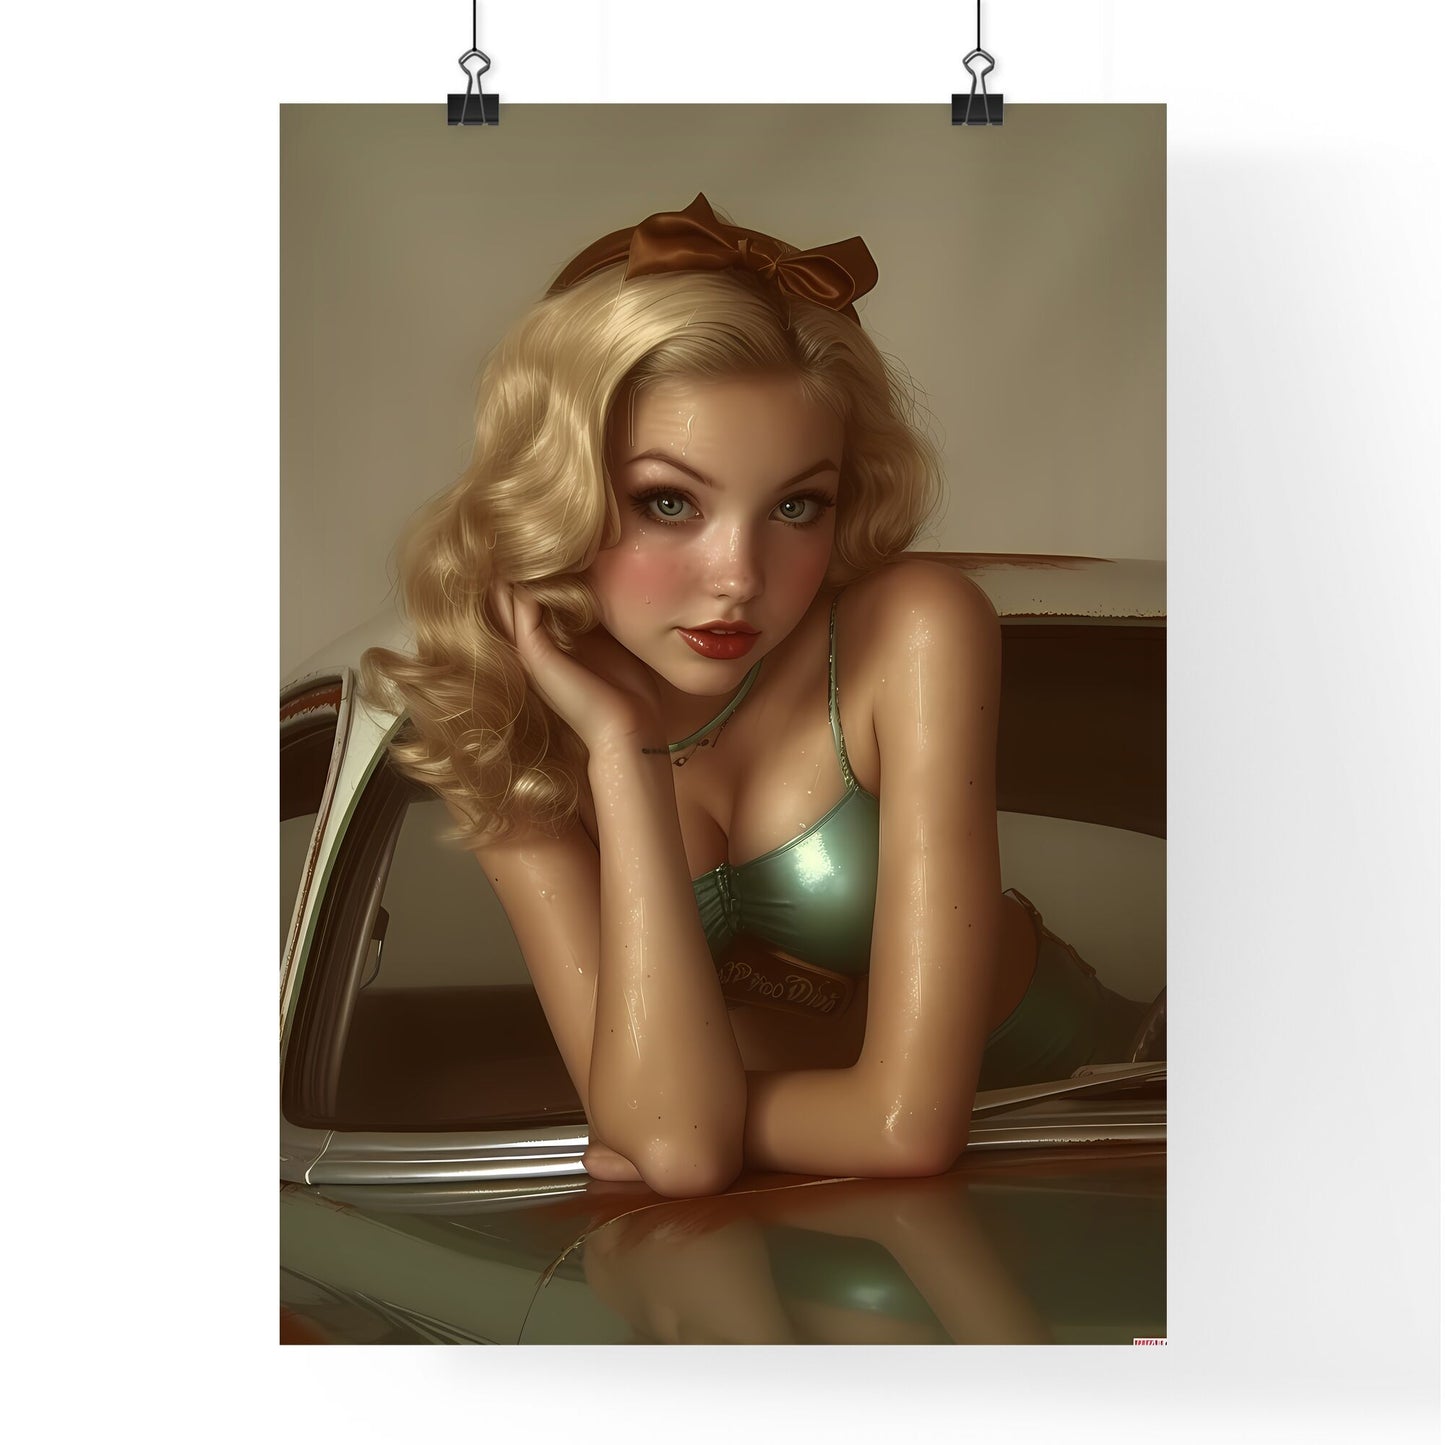 The vintage pin up girl leaning on a car - Art print of a woman posing in a car Default Title